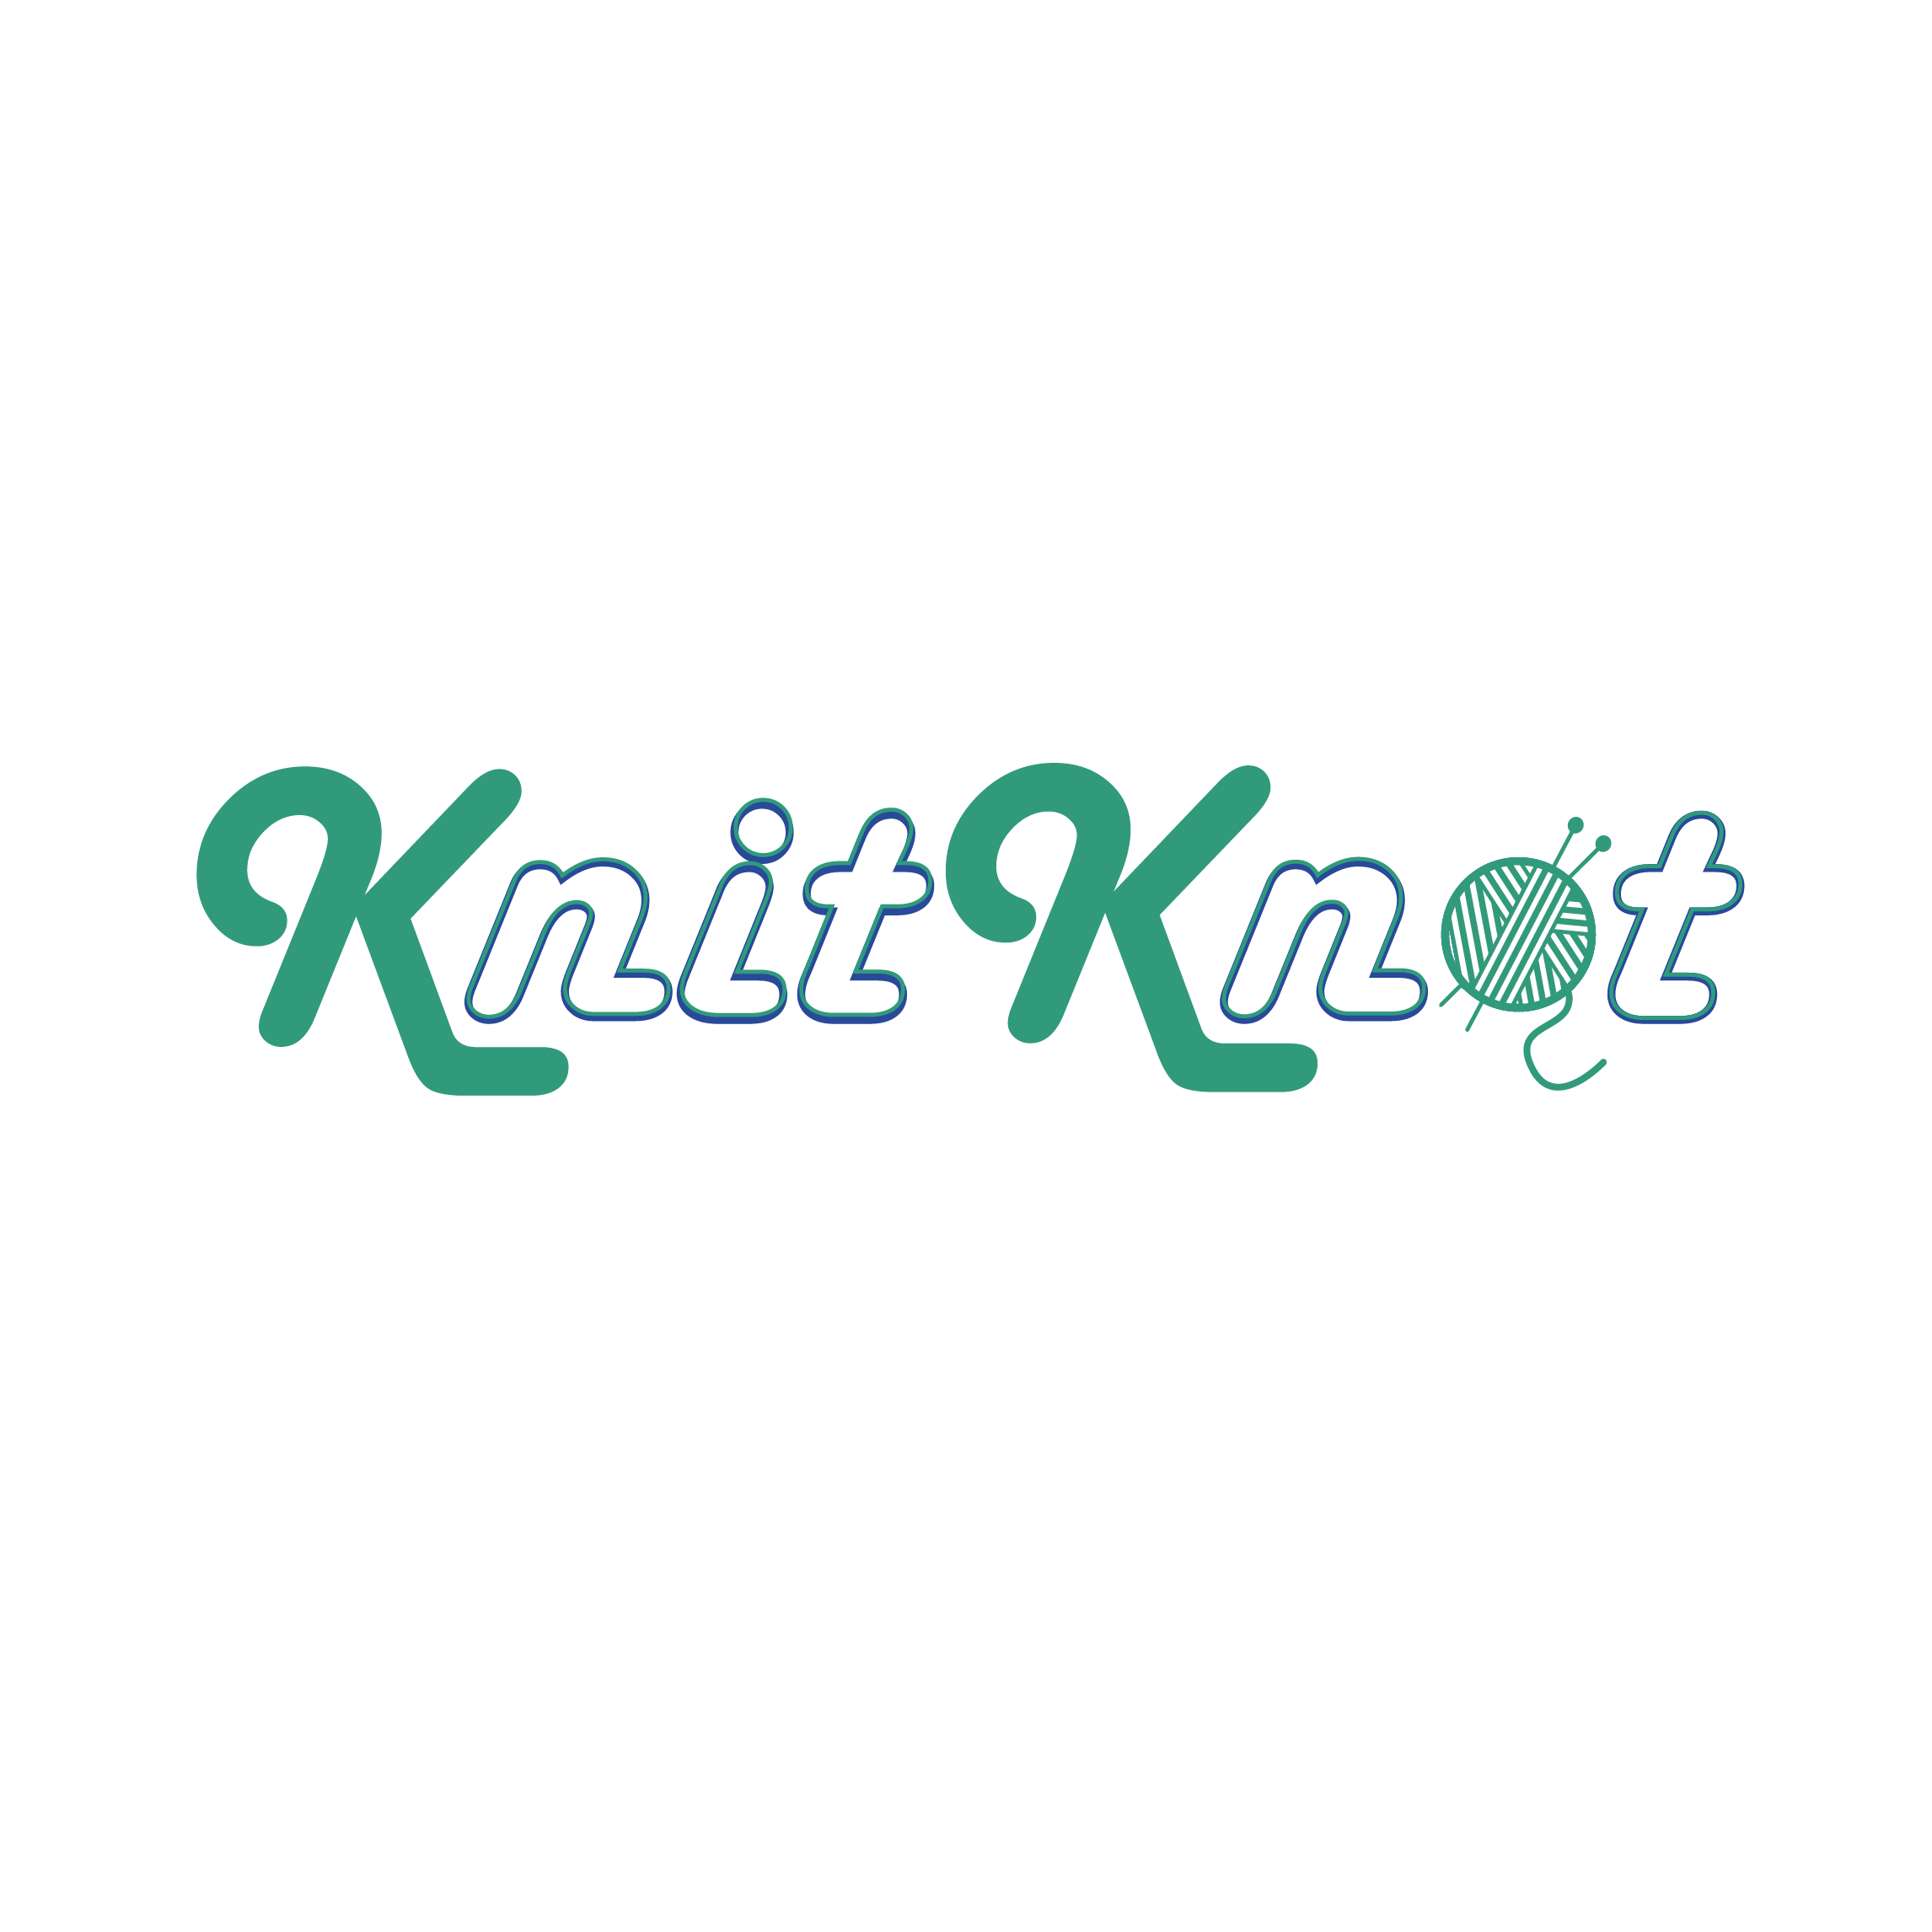 Logo and logomark for an online store of clothing and knitted items cover image.